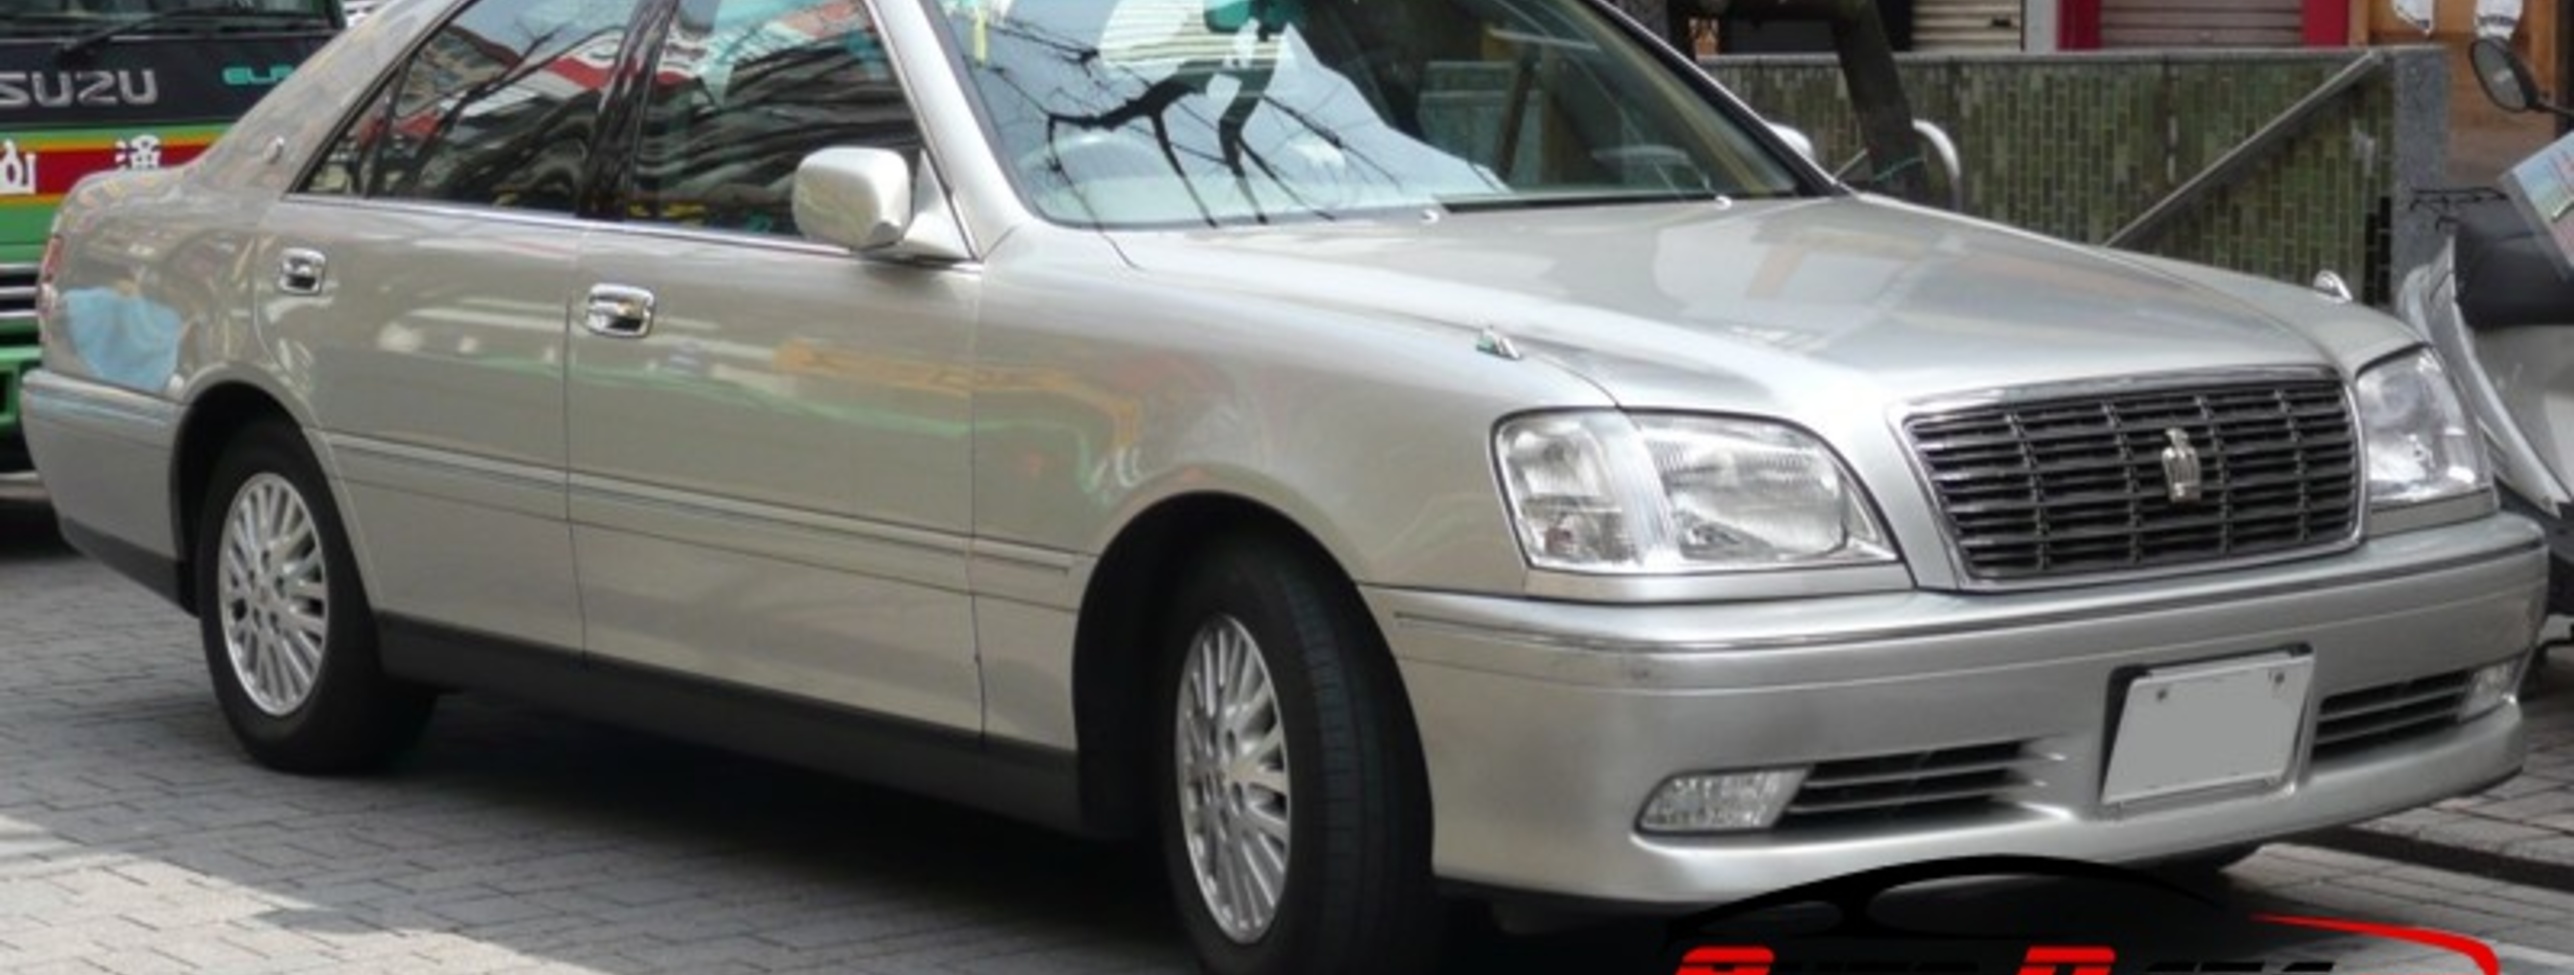 Toyota Crown Royal XI (S170, facelift 2001) 2.0 24V (160 Hp) Automatic 2001, 2002, 2003 